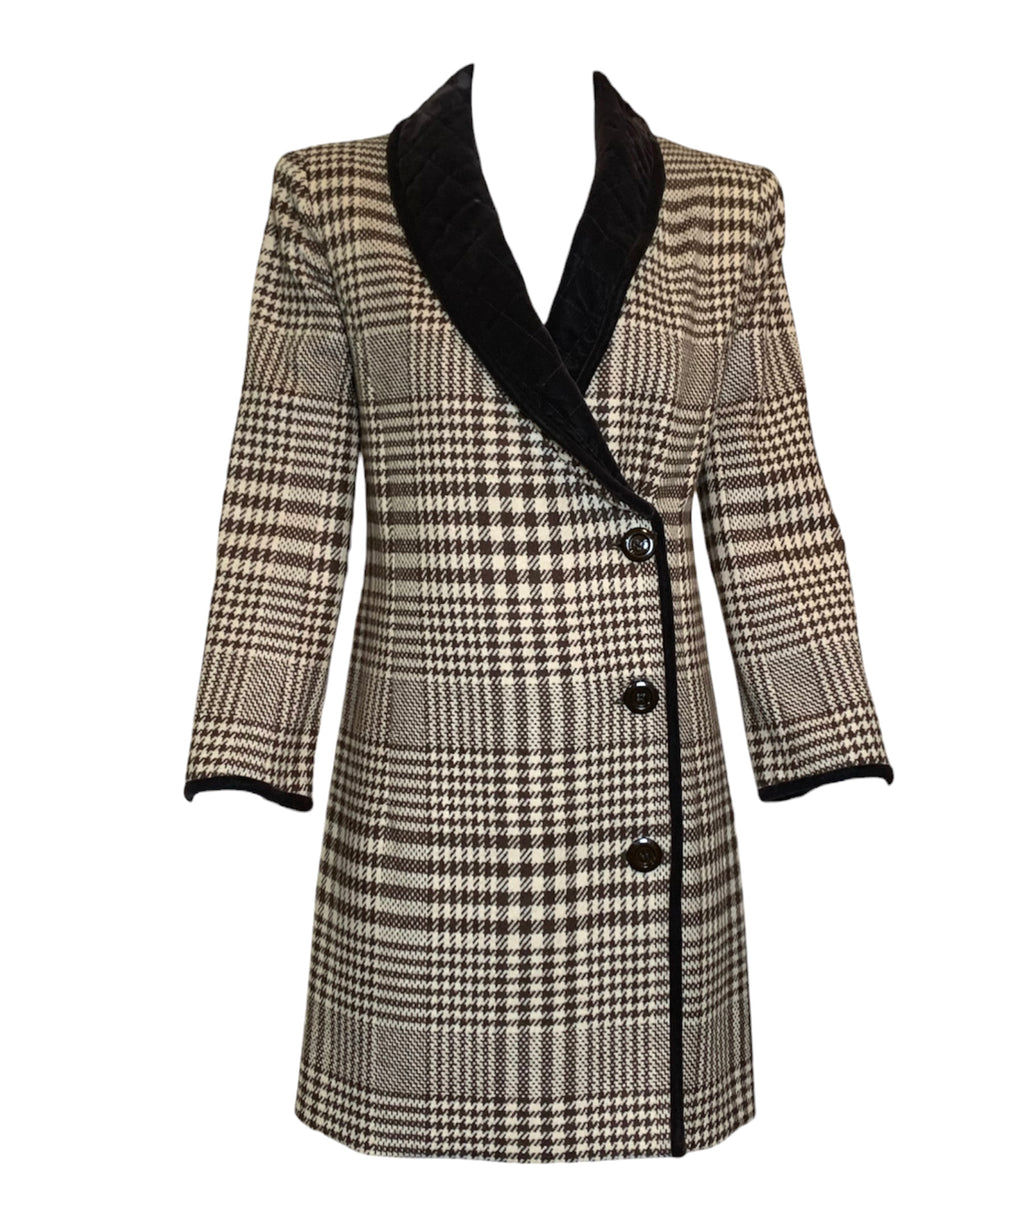   Valentino Brown and Ivory Houndstooth Wool Dress Coat with Velvet Trim FRONT 1 of 6